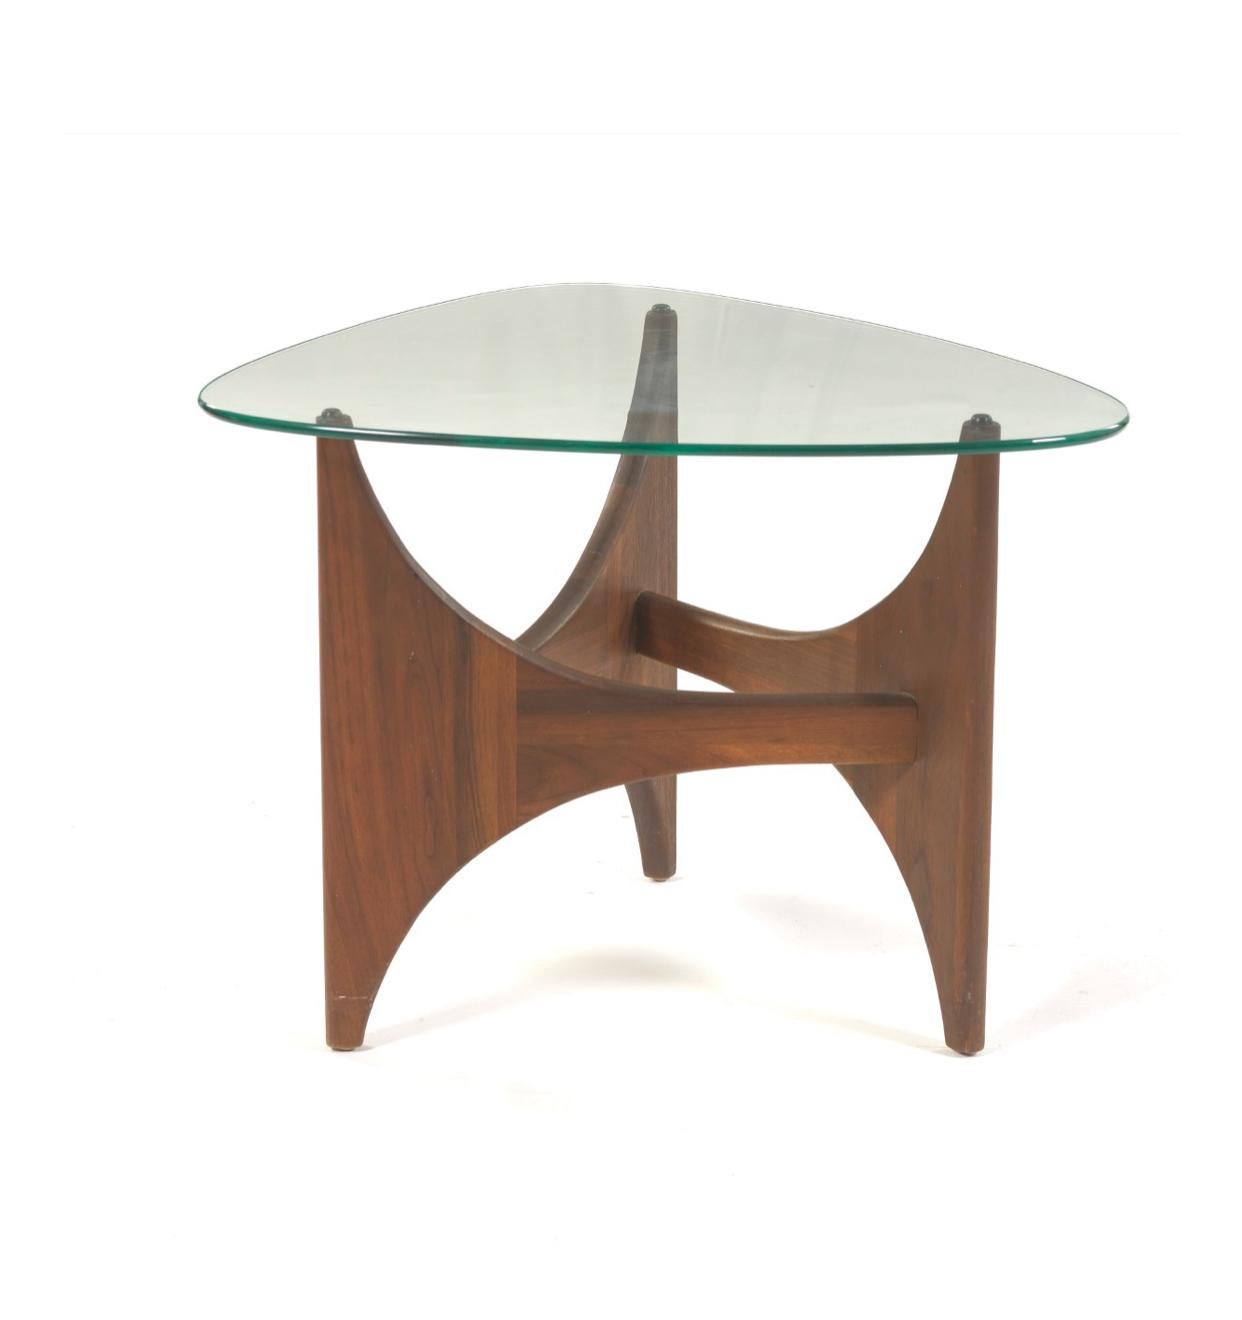 An iconic side table from Adrian Pearsall for Craft Associates. Oiled walnut base with good, well defined wood grain. Triangular shaped glass top is in good condition. 